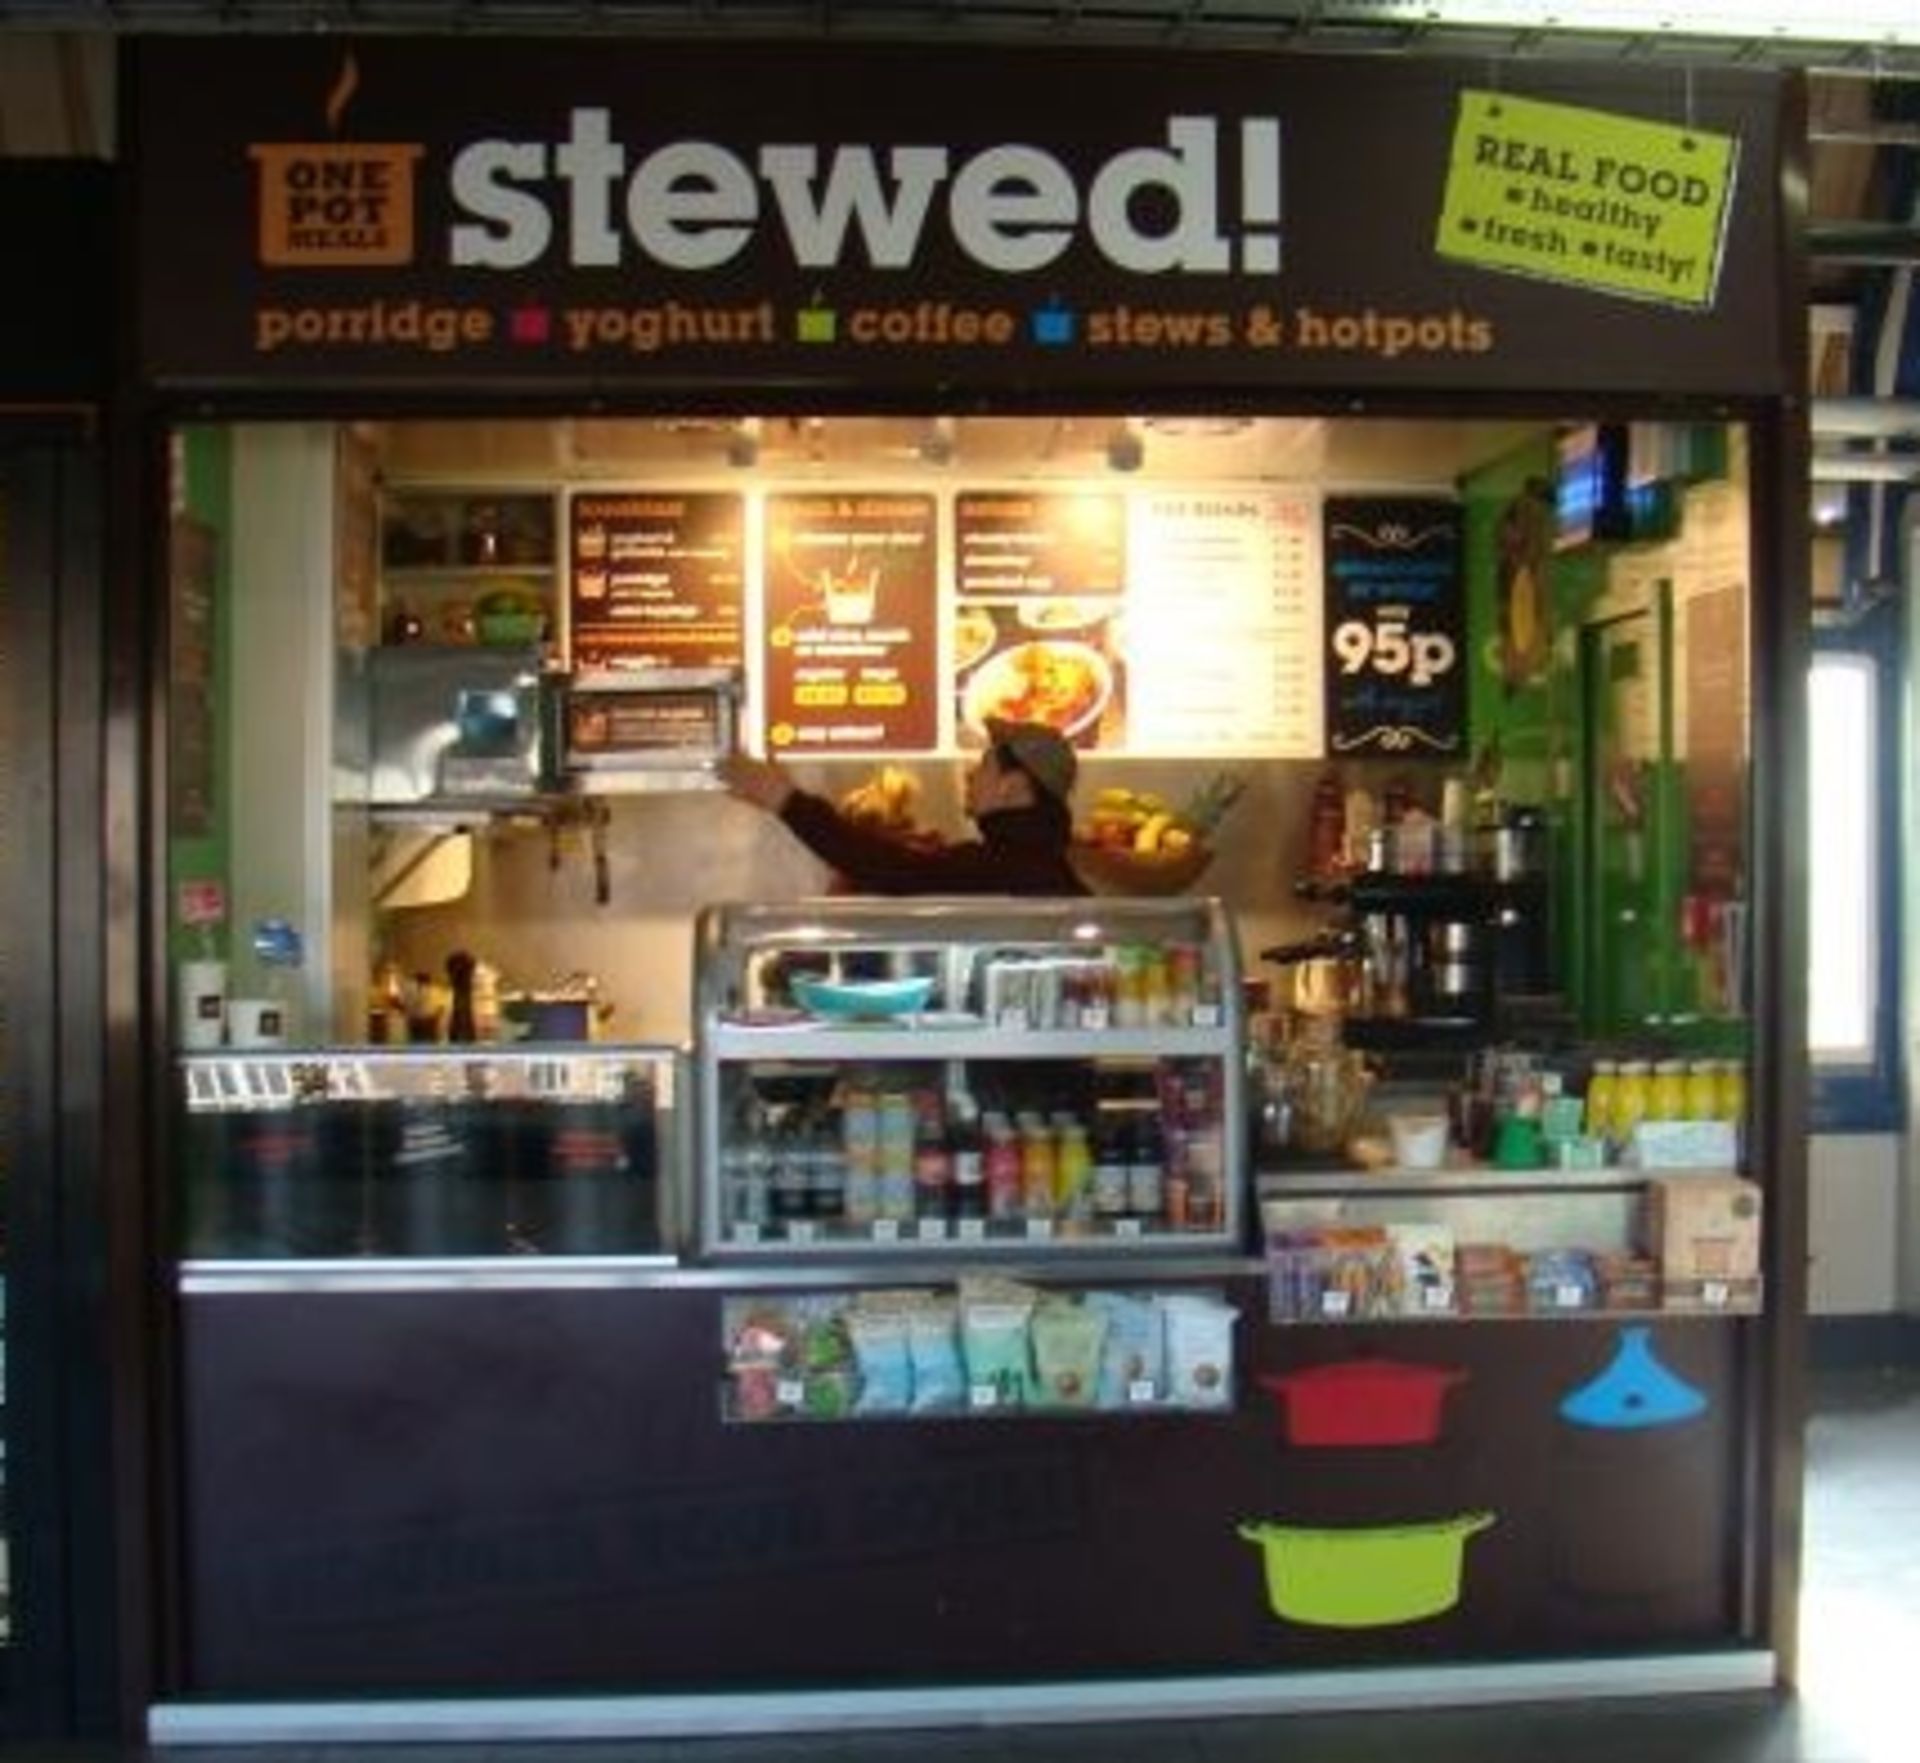 AJC Retail Solutions - Stewed Food and Coffee Kiosk - Complete Business Opportunity! - Image 4 of 25